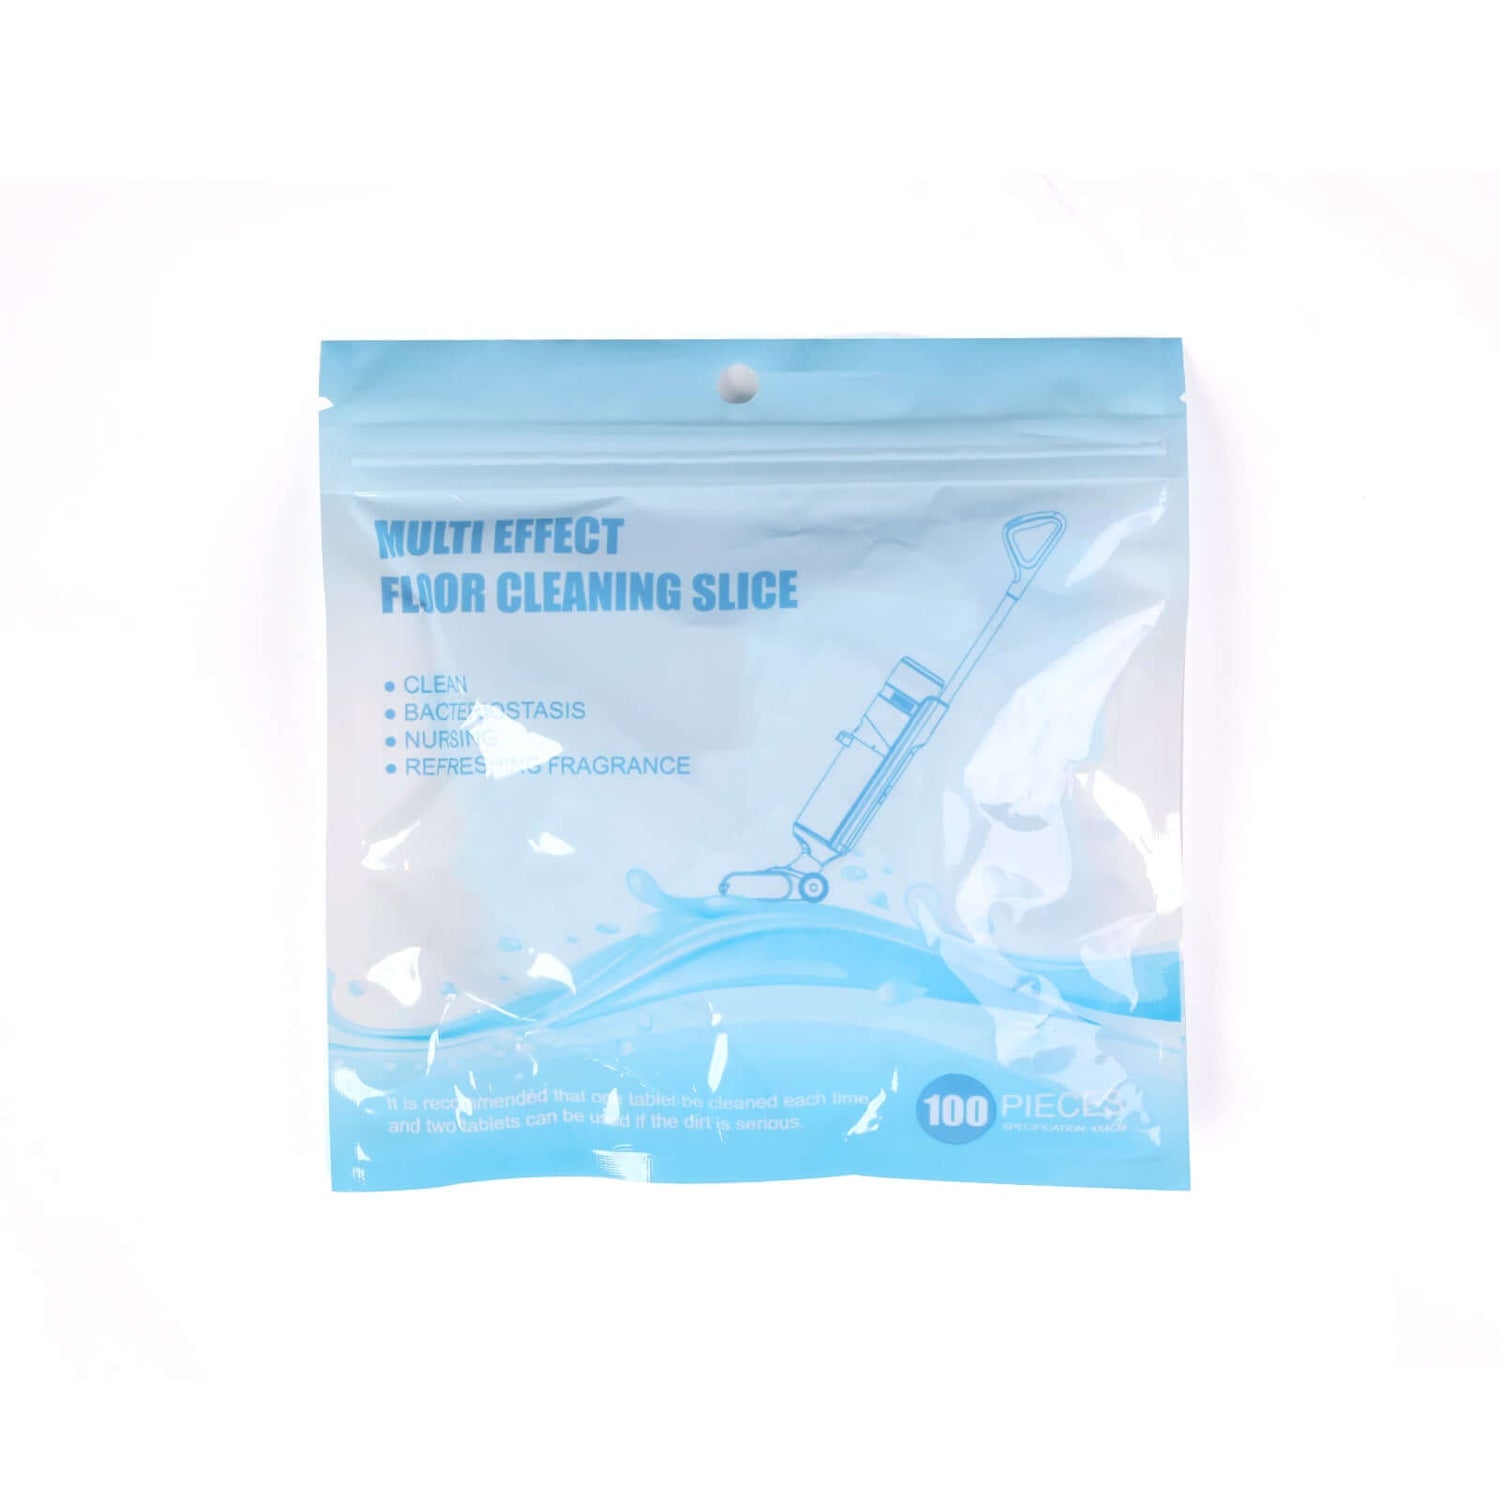 INSE Detergent Sheet for Wet Dry Vacuum W5-inselife.com